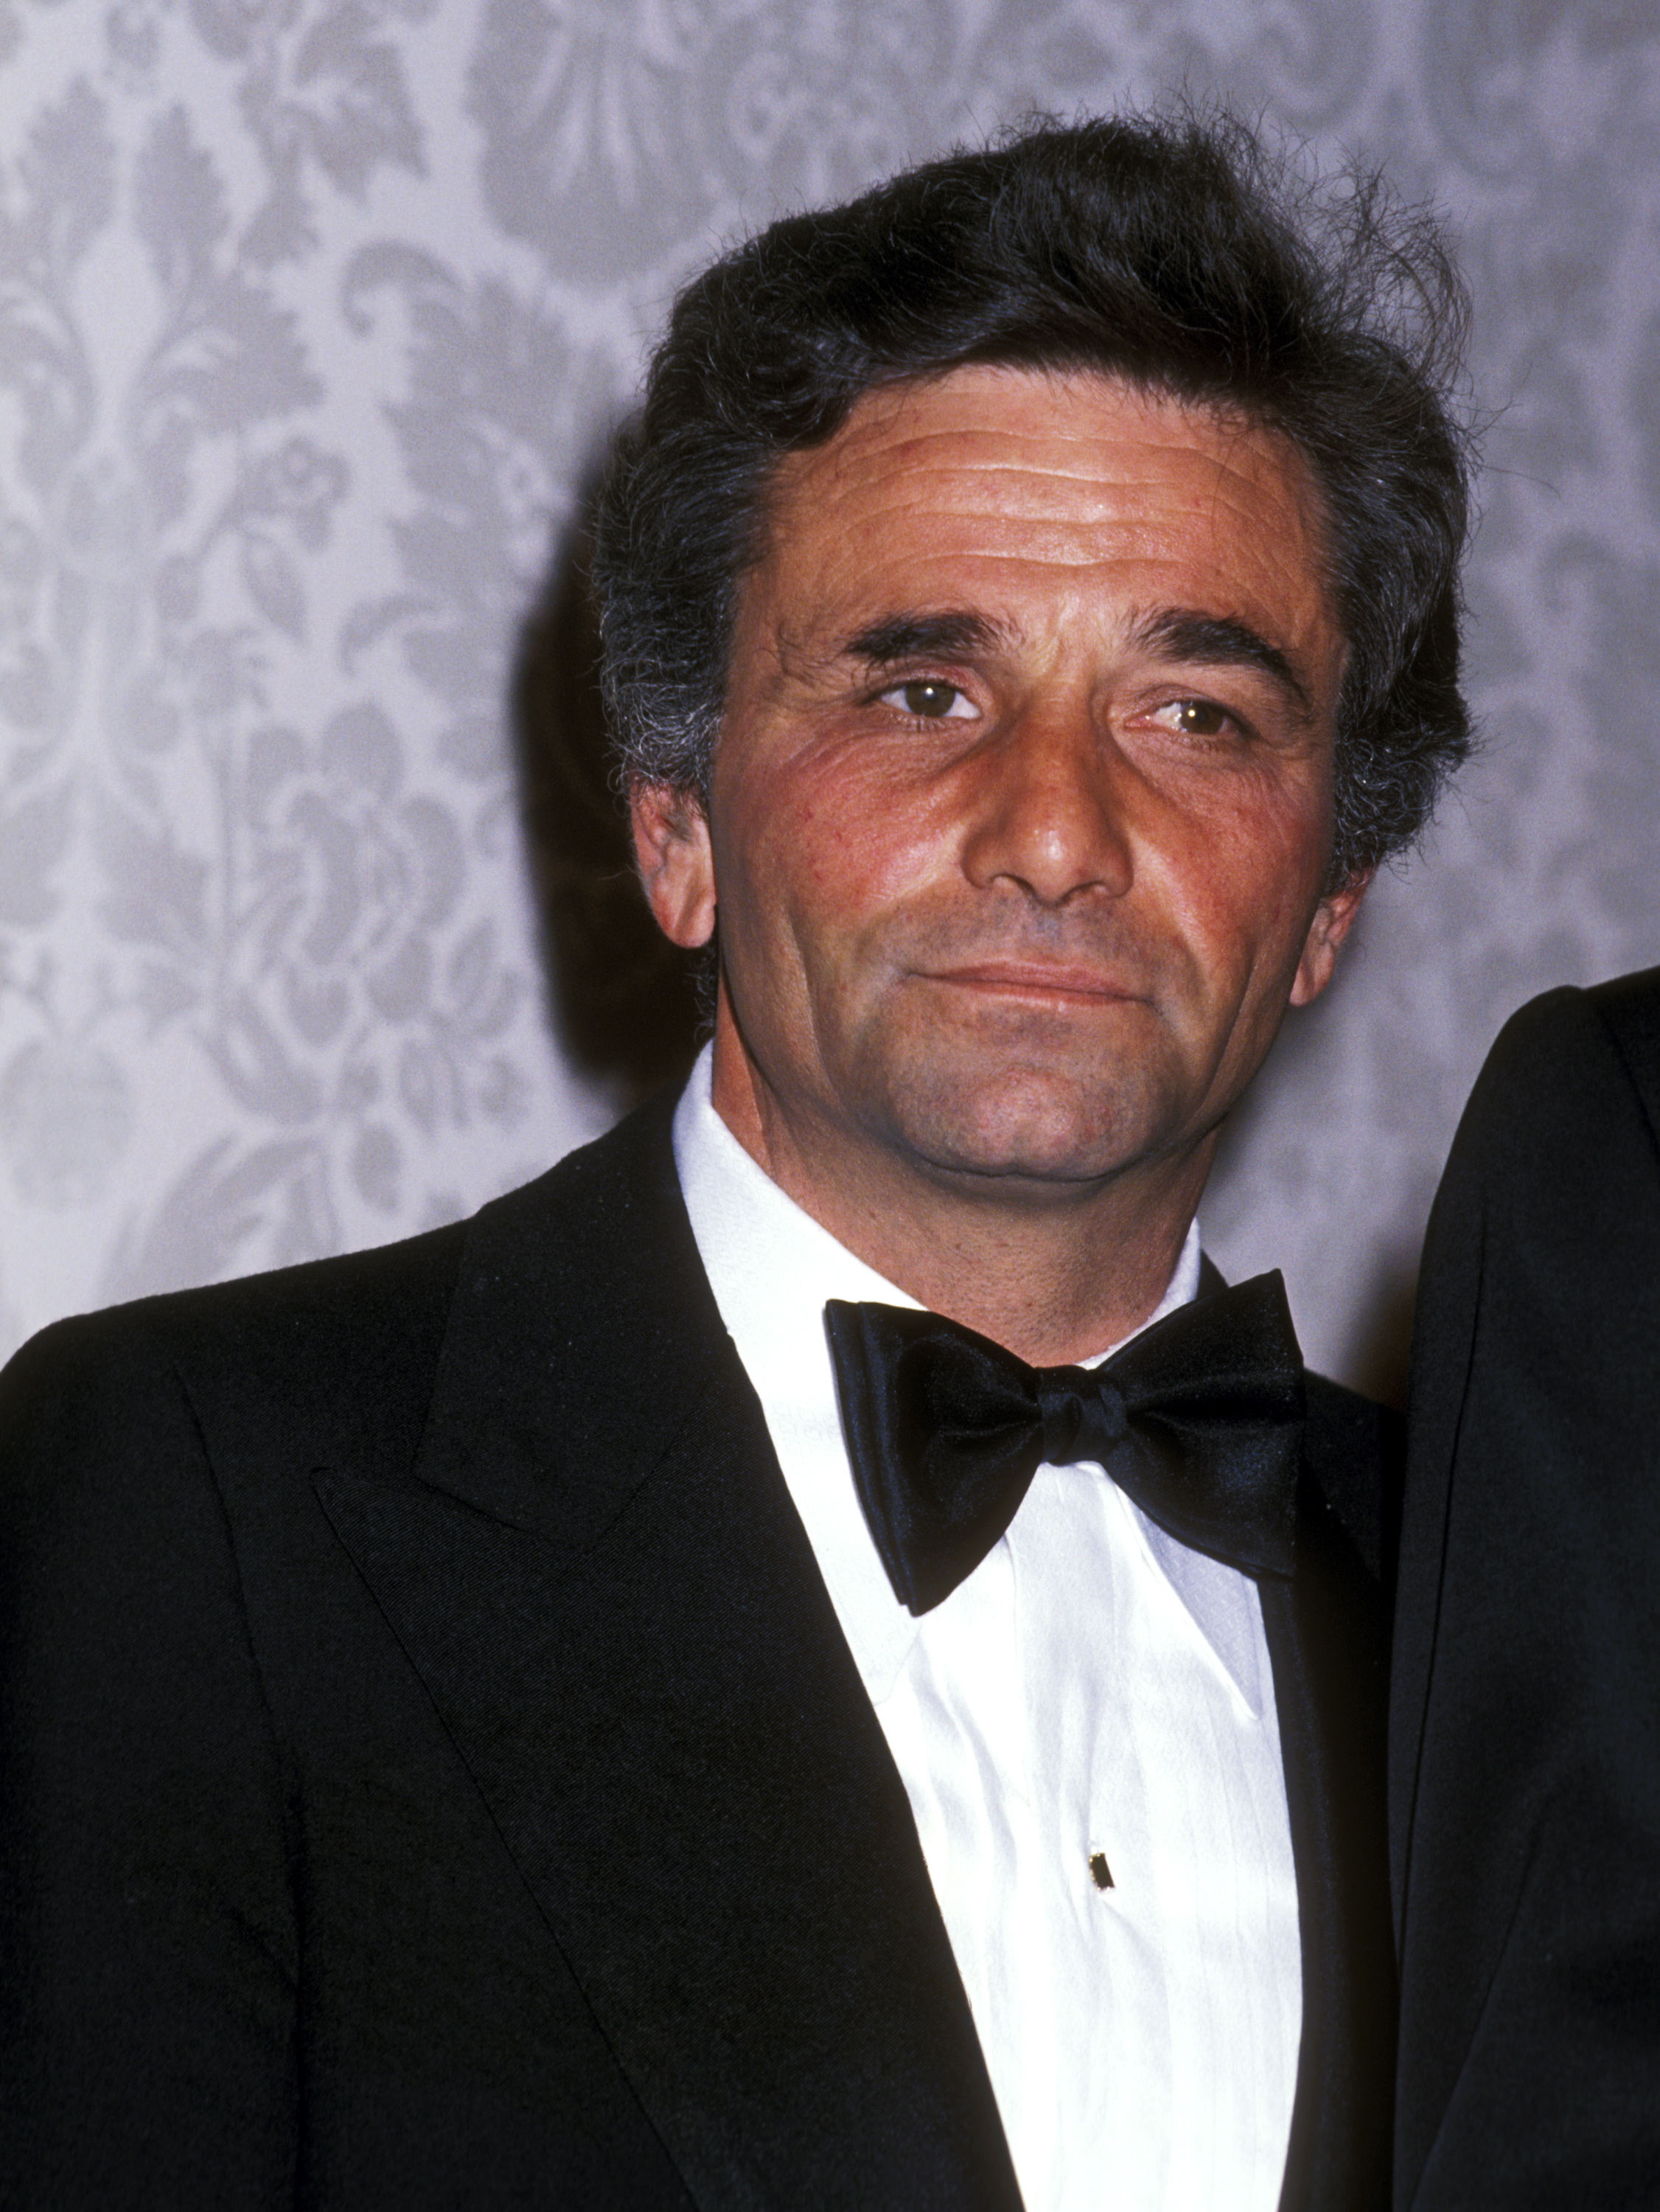 Peter Falk at the 35th Annual Golden Globe Awards in Beverly Hills, California on January 28, 1978 | Source: Getty Images